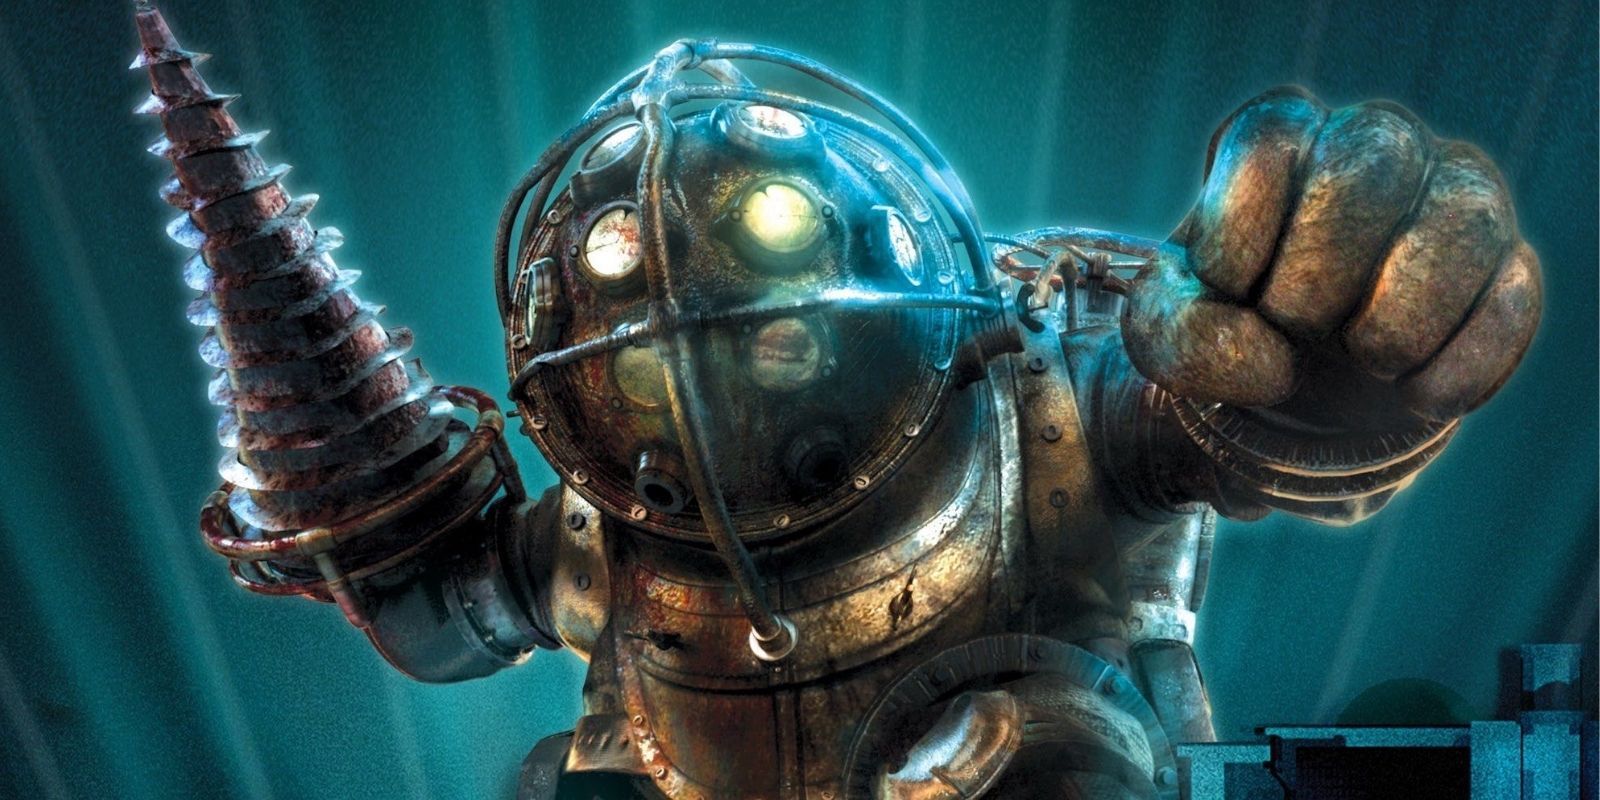 A Big Daddy as they appear in the original Bioshock